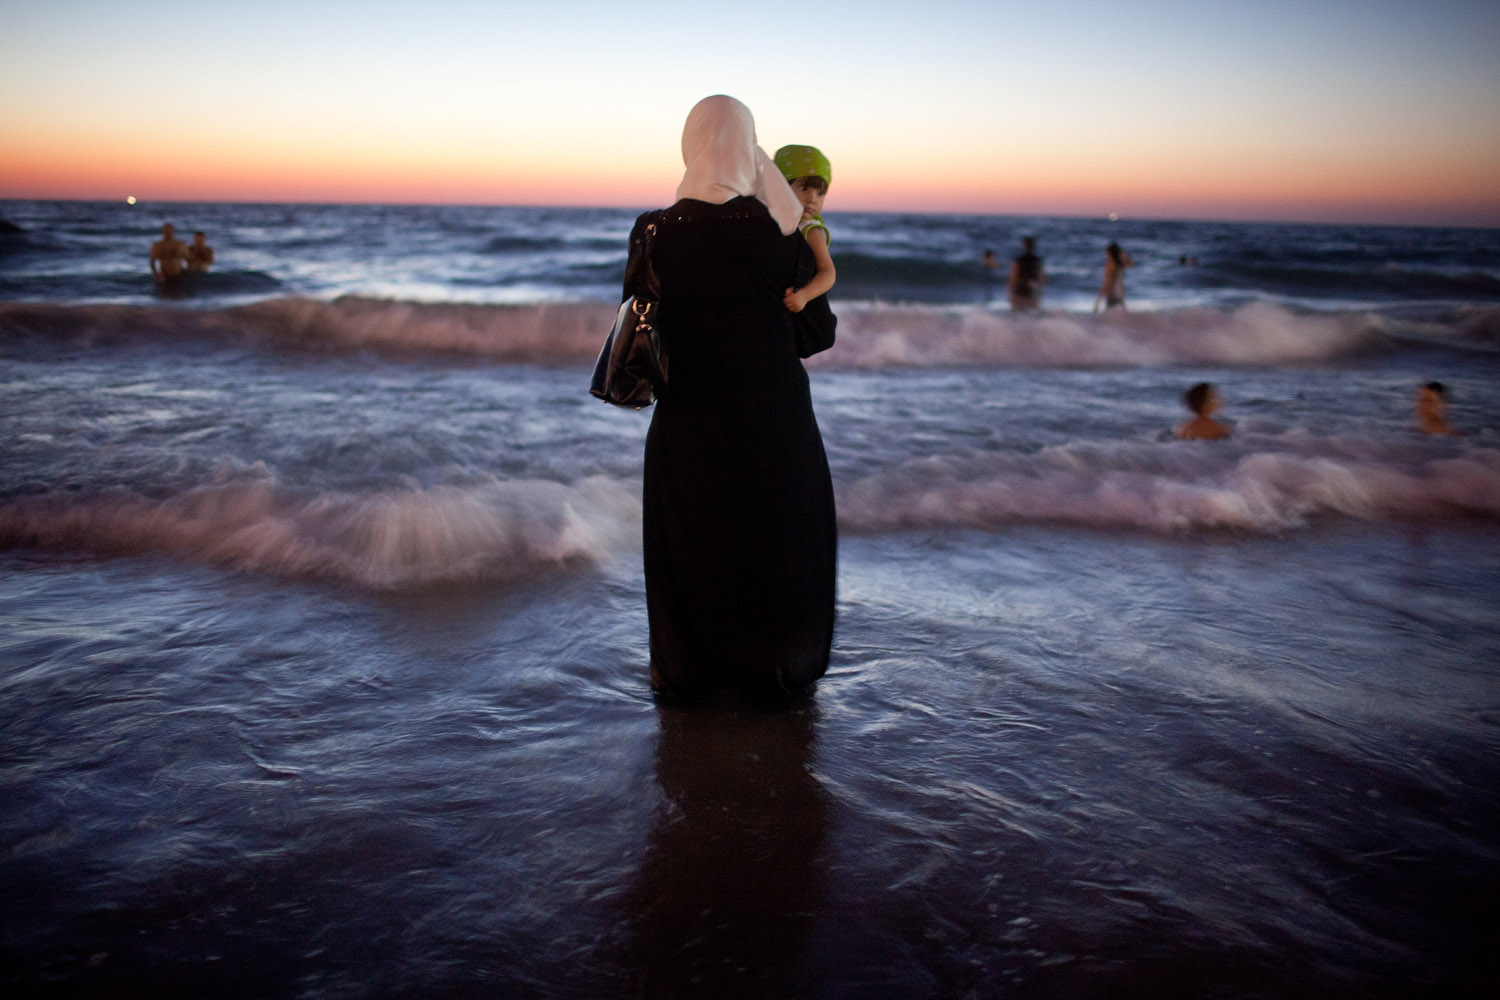 Aug. 21, 2012. A woman holds her baby as Palestinians enjoy a day at a beach during Eid al-Fitr, which marks the end of the holy month of Ramadan in Tel Aviv.